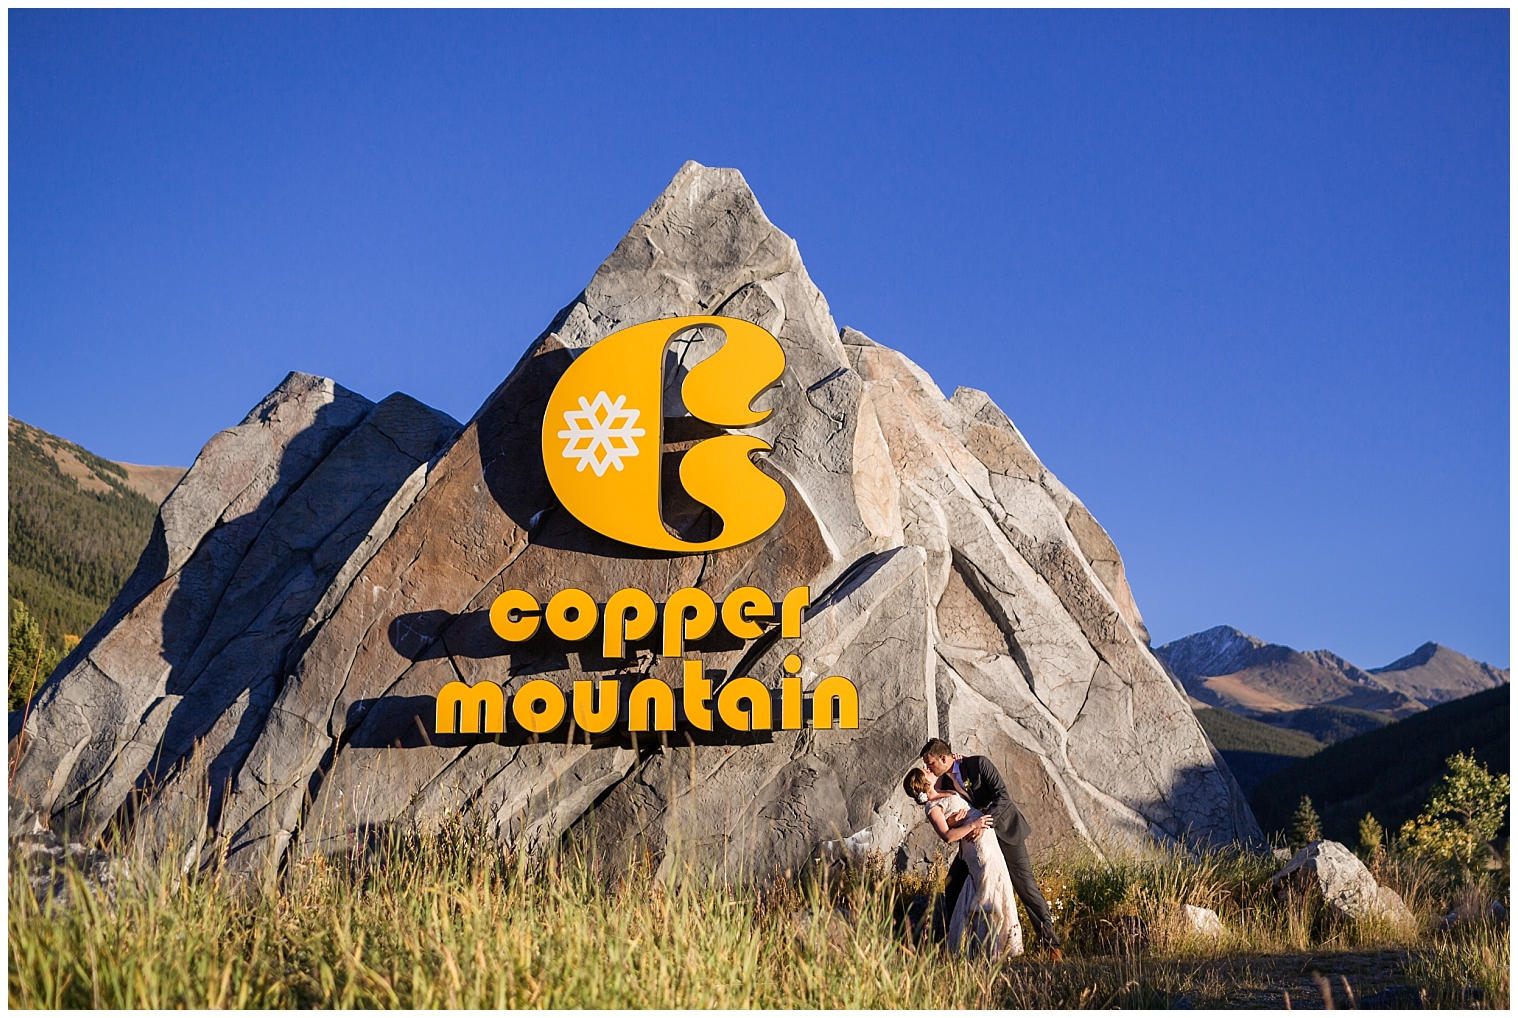 The wedding couple kiss in front of the Copper Mountain sign.